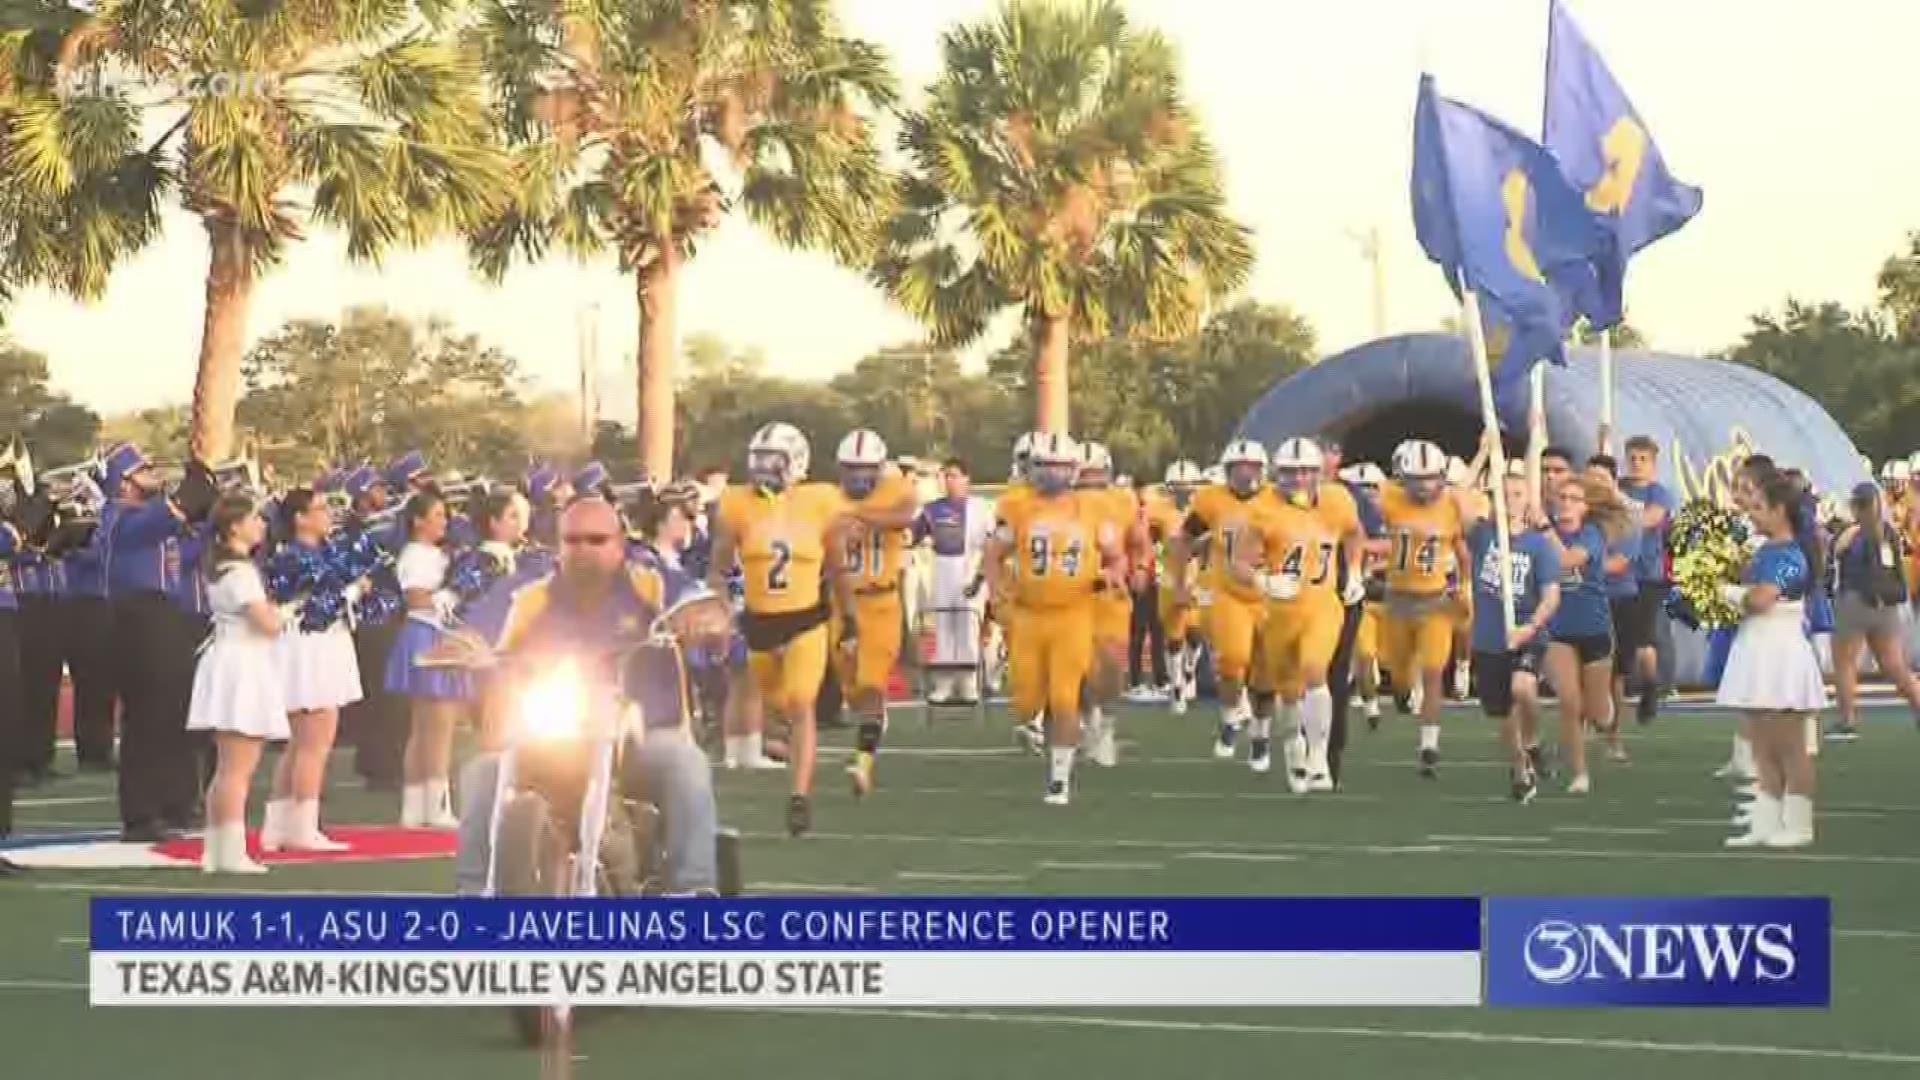 Angelo State dominated Texas A&M-Kingsville on Saturday night handing the Javelinas their second loss of the season 44-7.